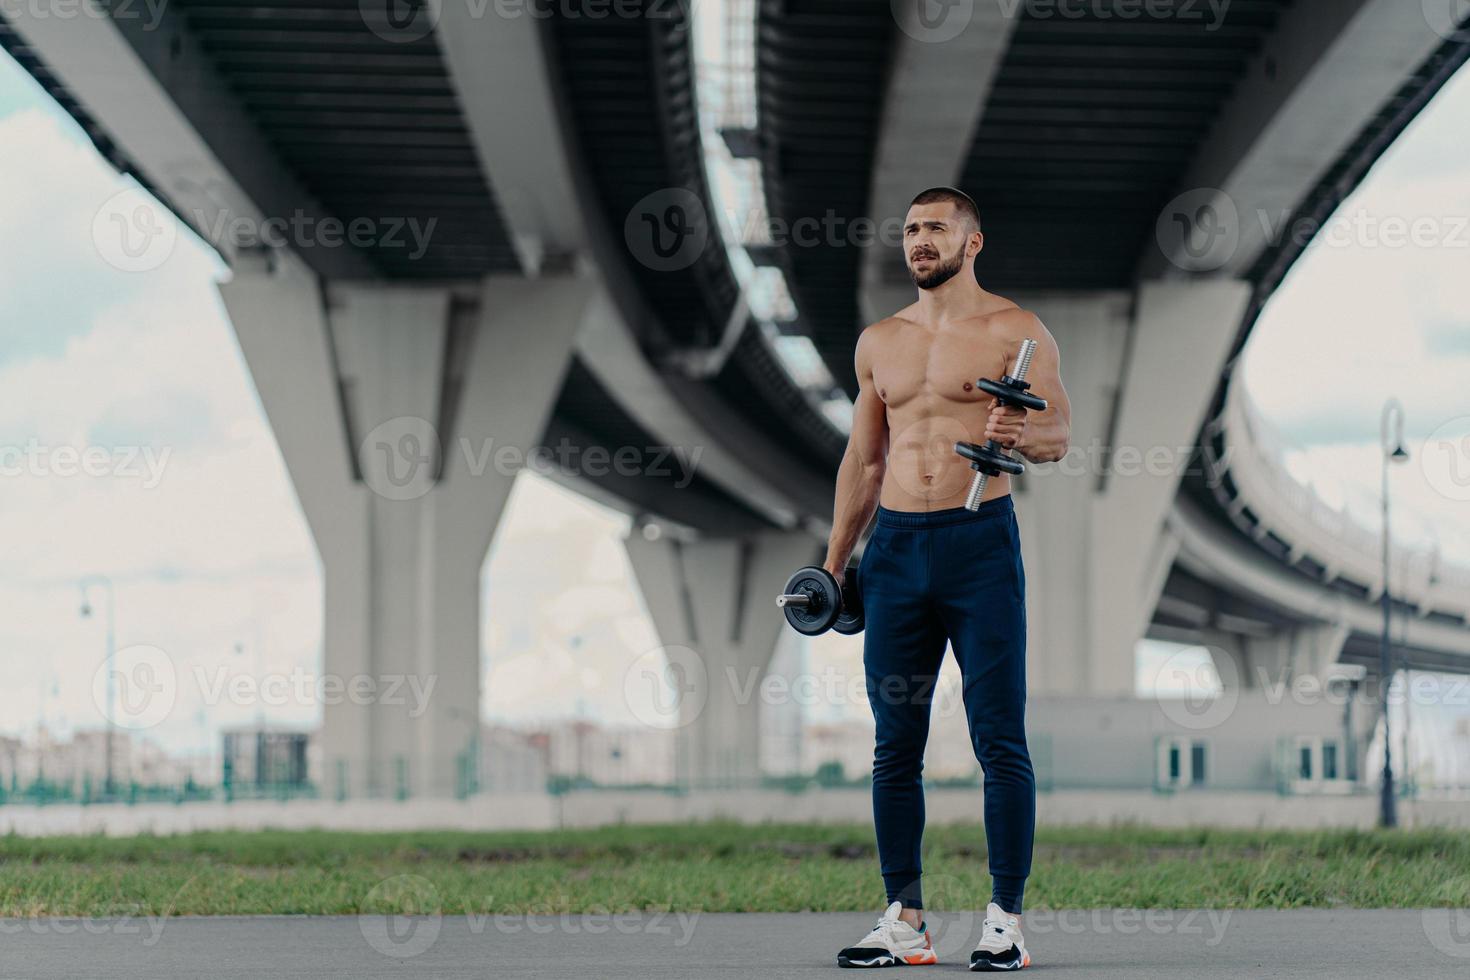 Muscular athletic bearded bodybuilder raises dumbbells works on biceps has hard workout near bridge dressed in sport trousers and sneakers, being motivated, enjoys sport. Healthy lifestyle concept photo